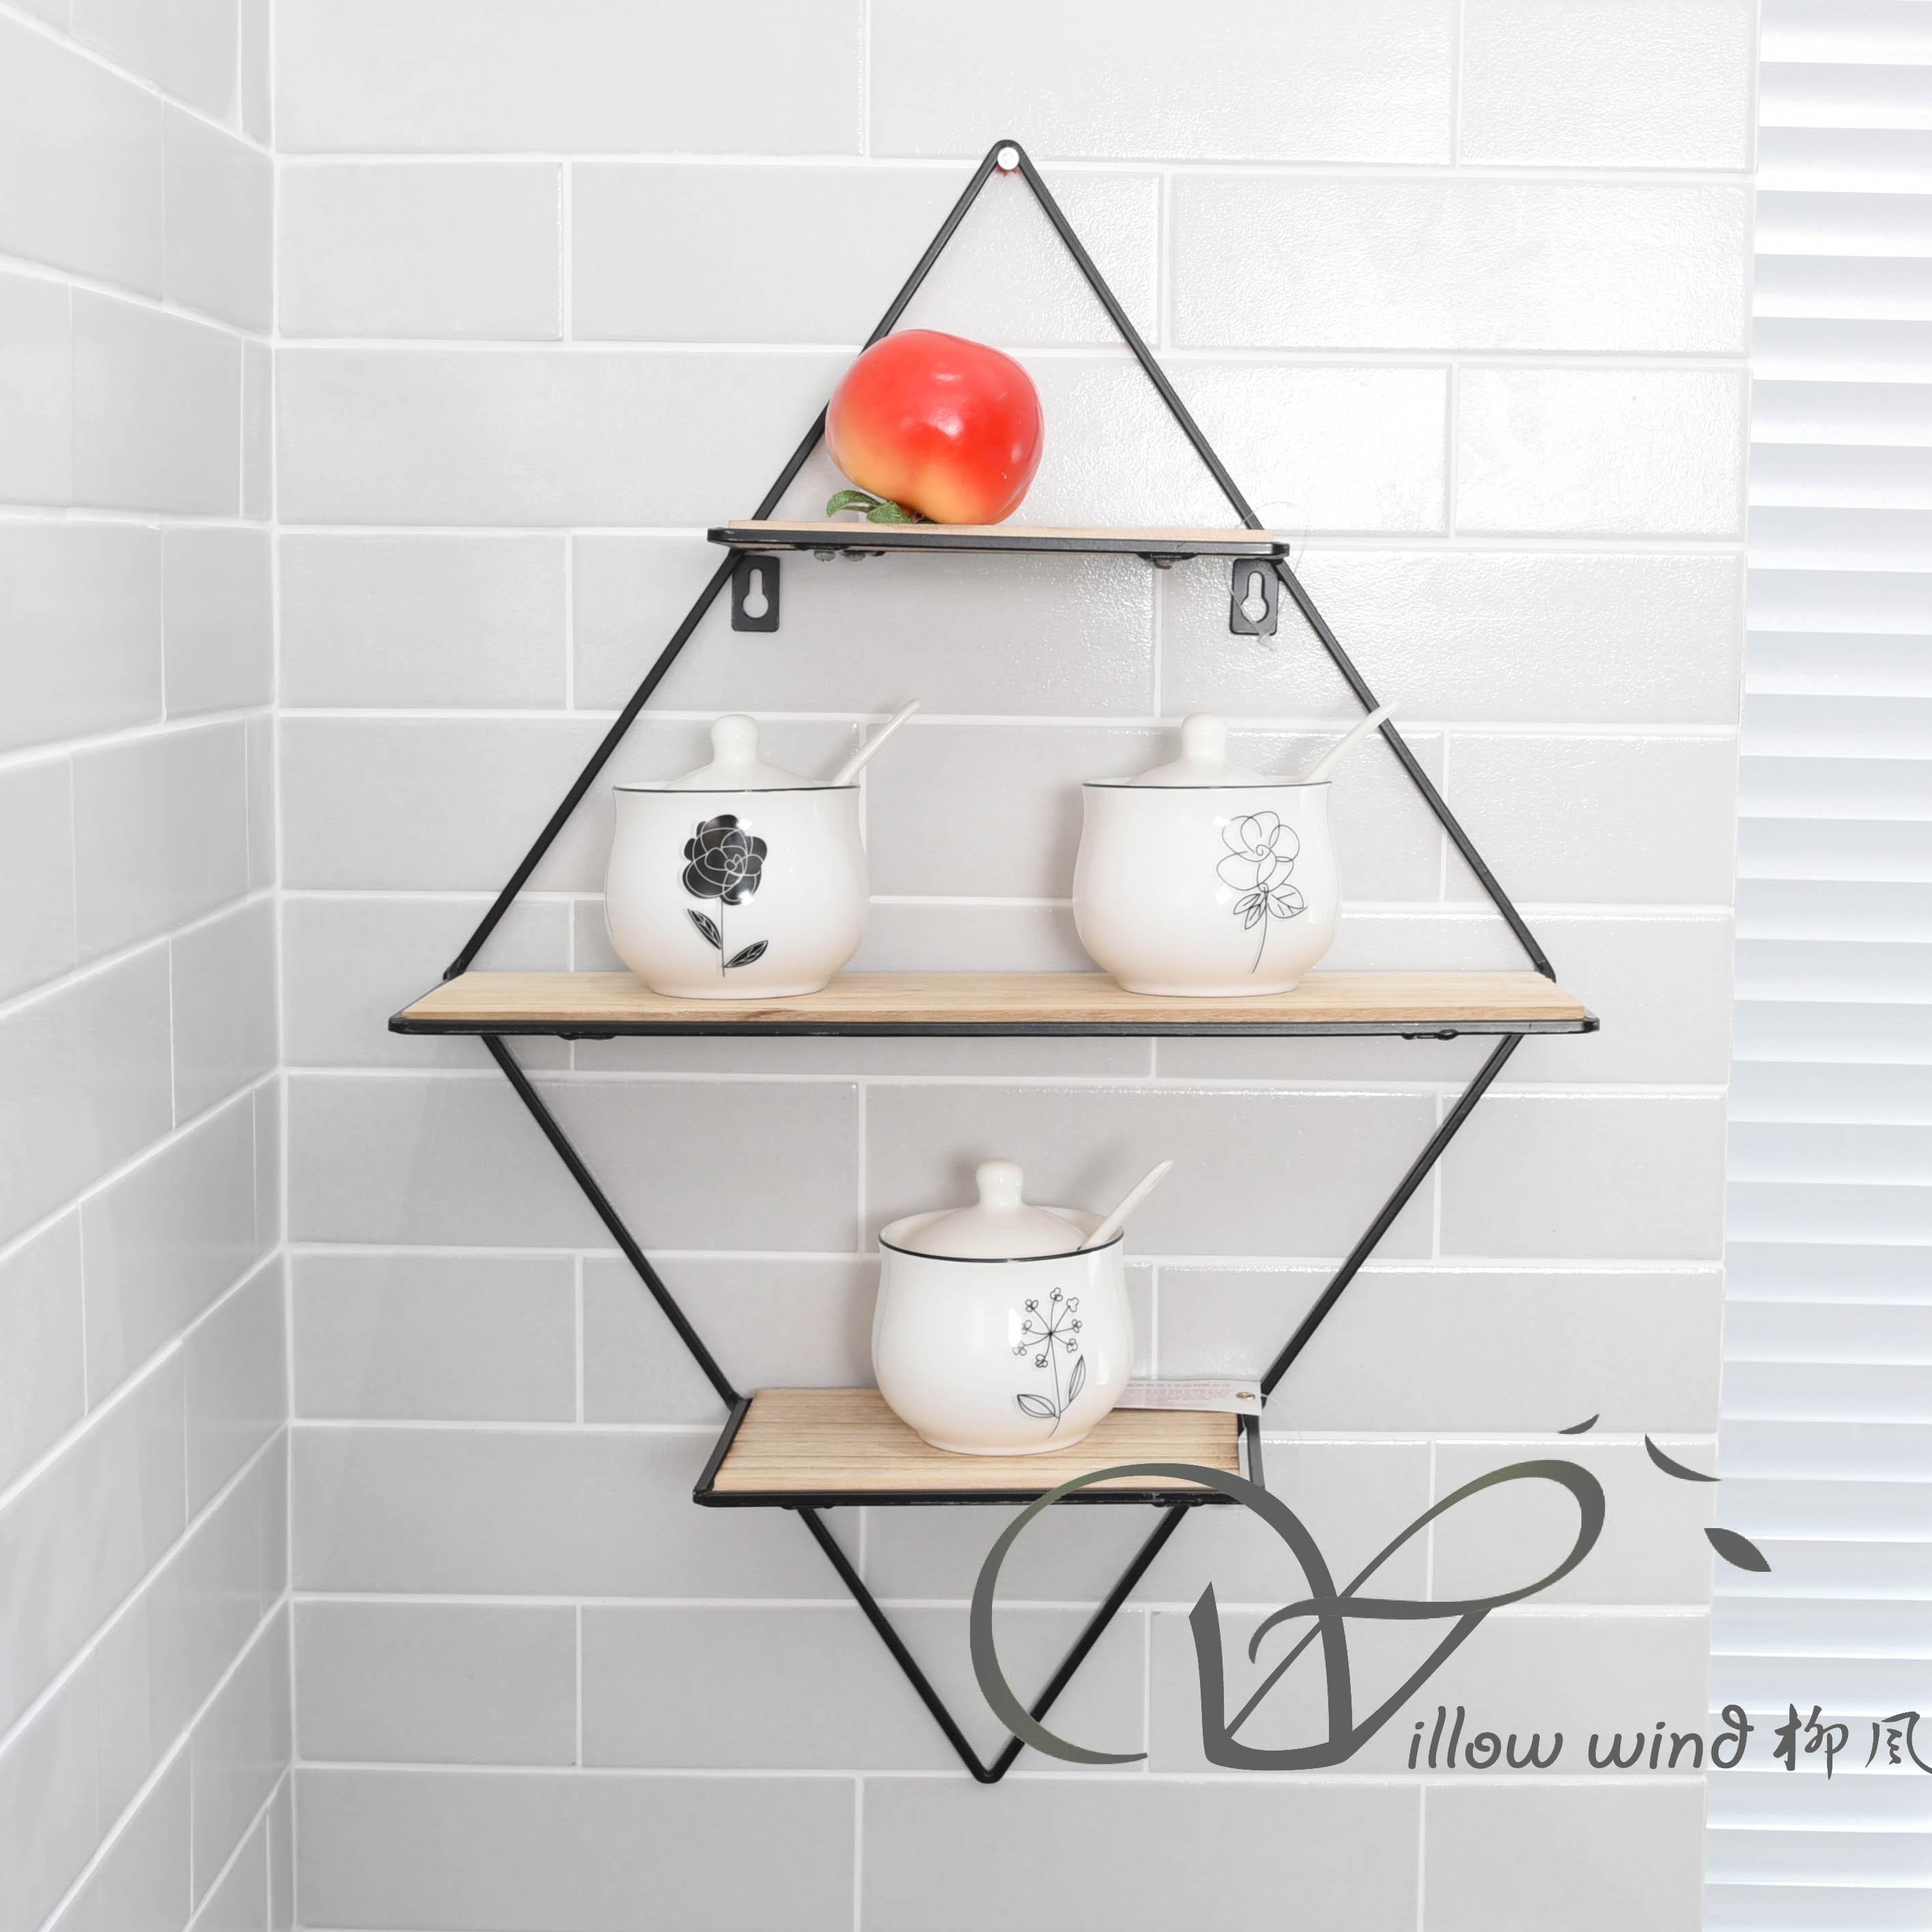 Black Rectangle wall hanging wire shelf